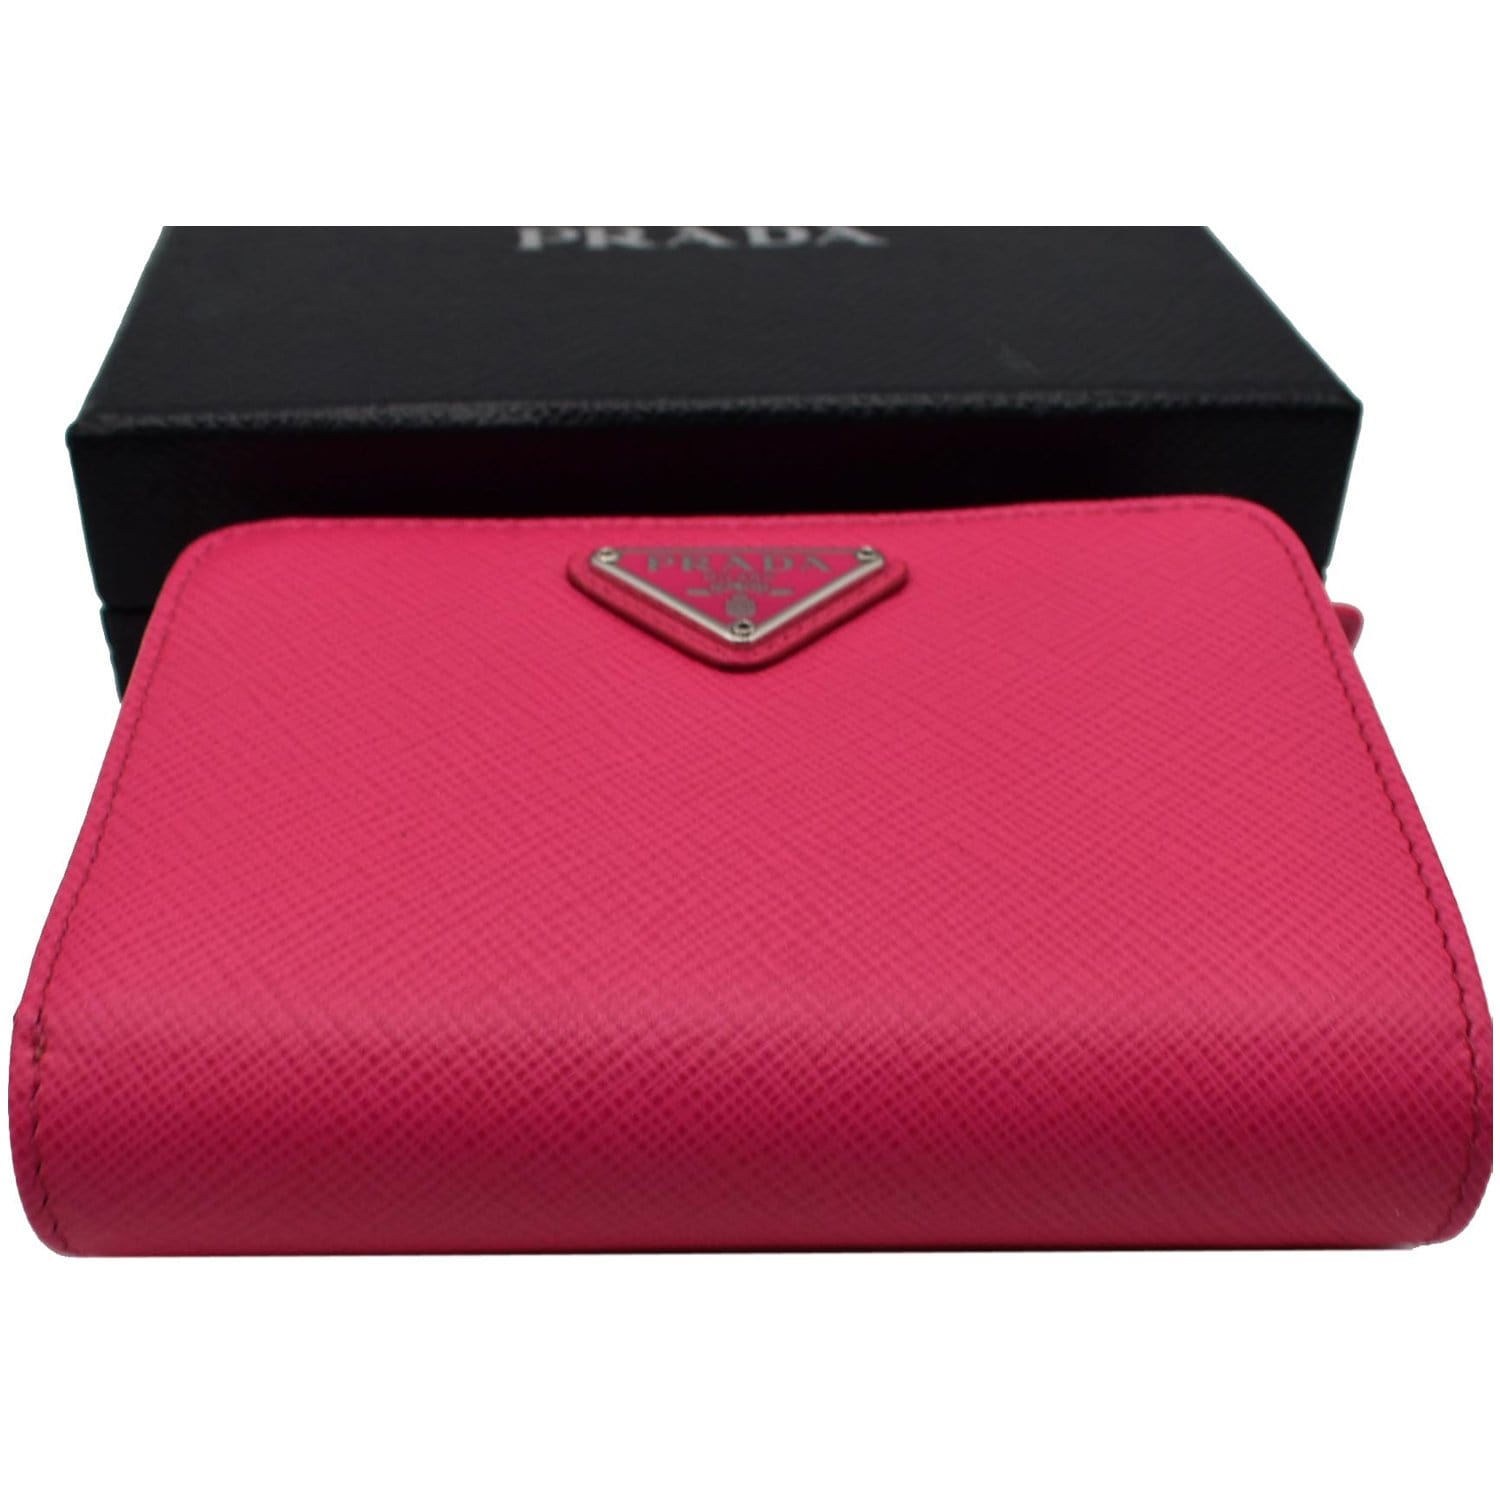 prada small saffiano leather wallet pink, RvceShops Revival